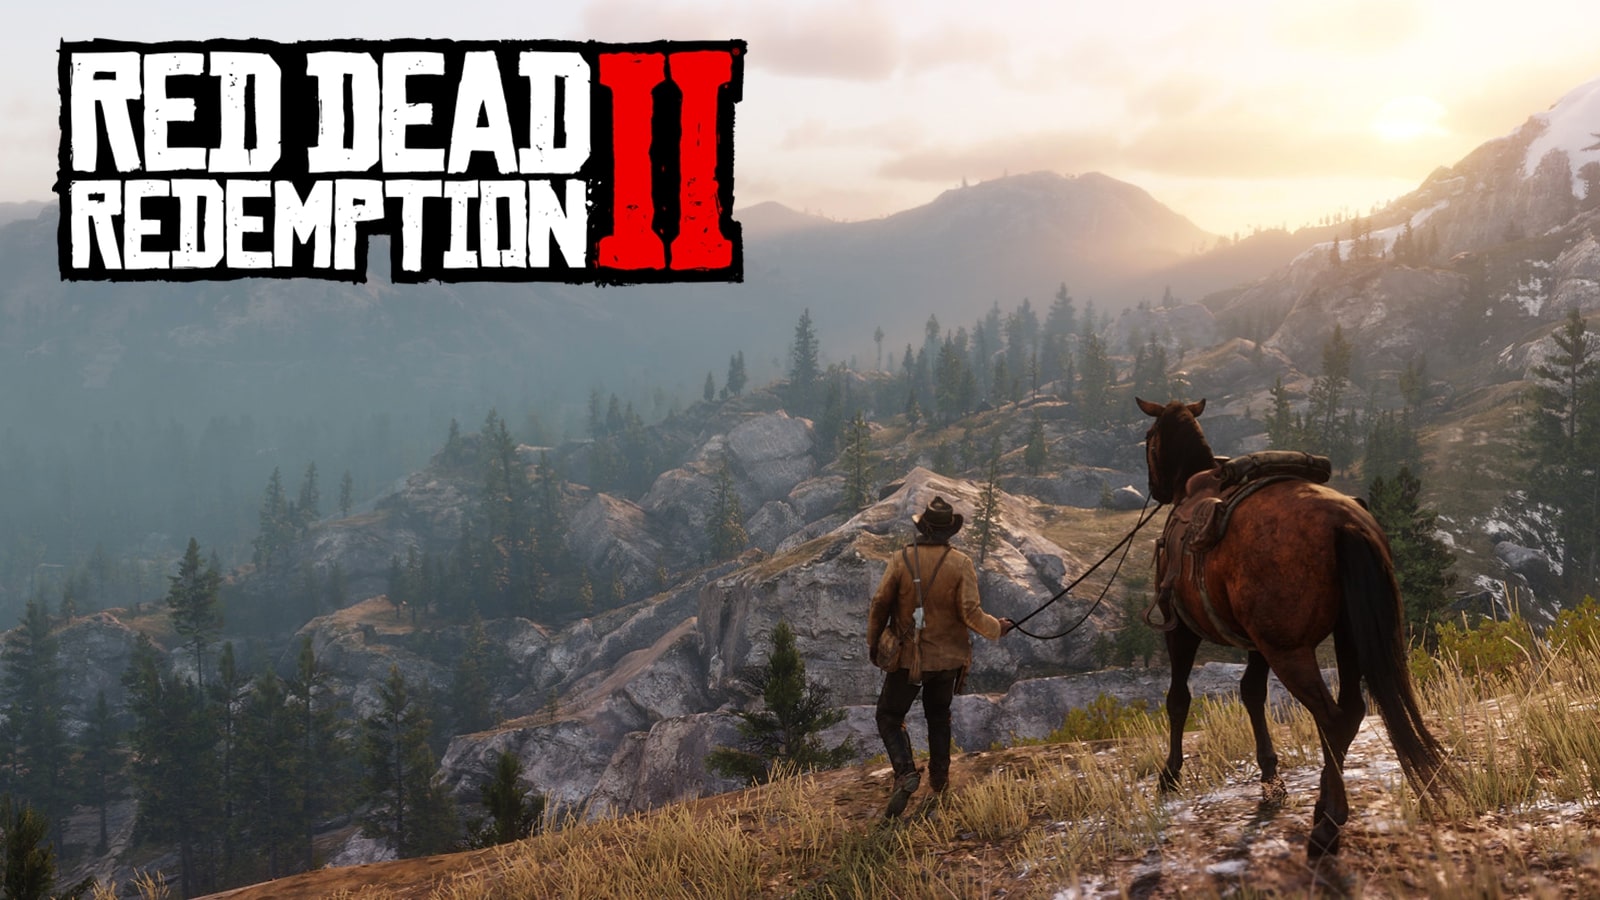 Red Dead Redemption 2 NEWS: Great PS4 and Xbox One update for Rockstar, Gaming, Entertainment